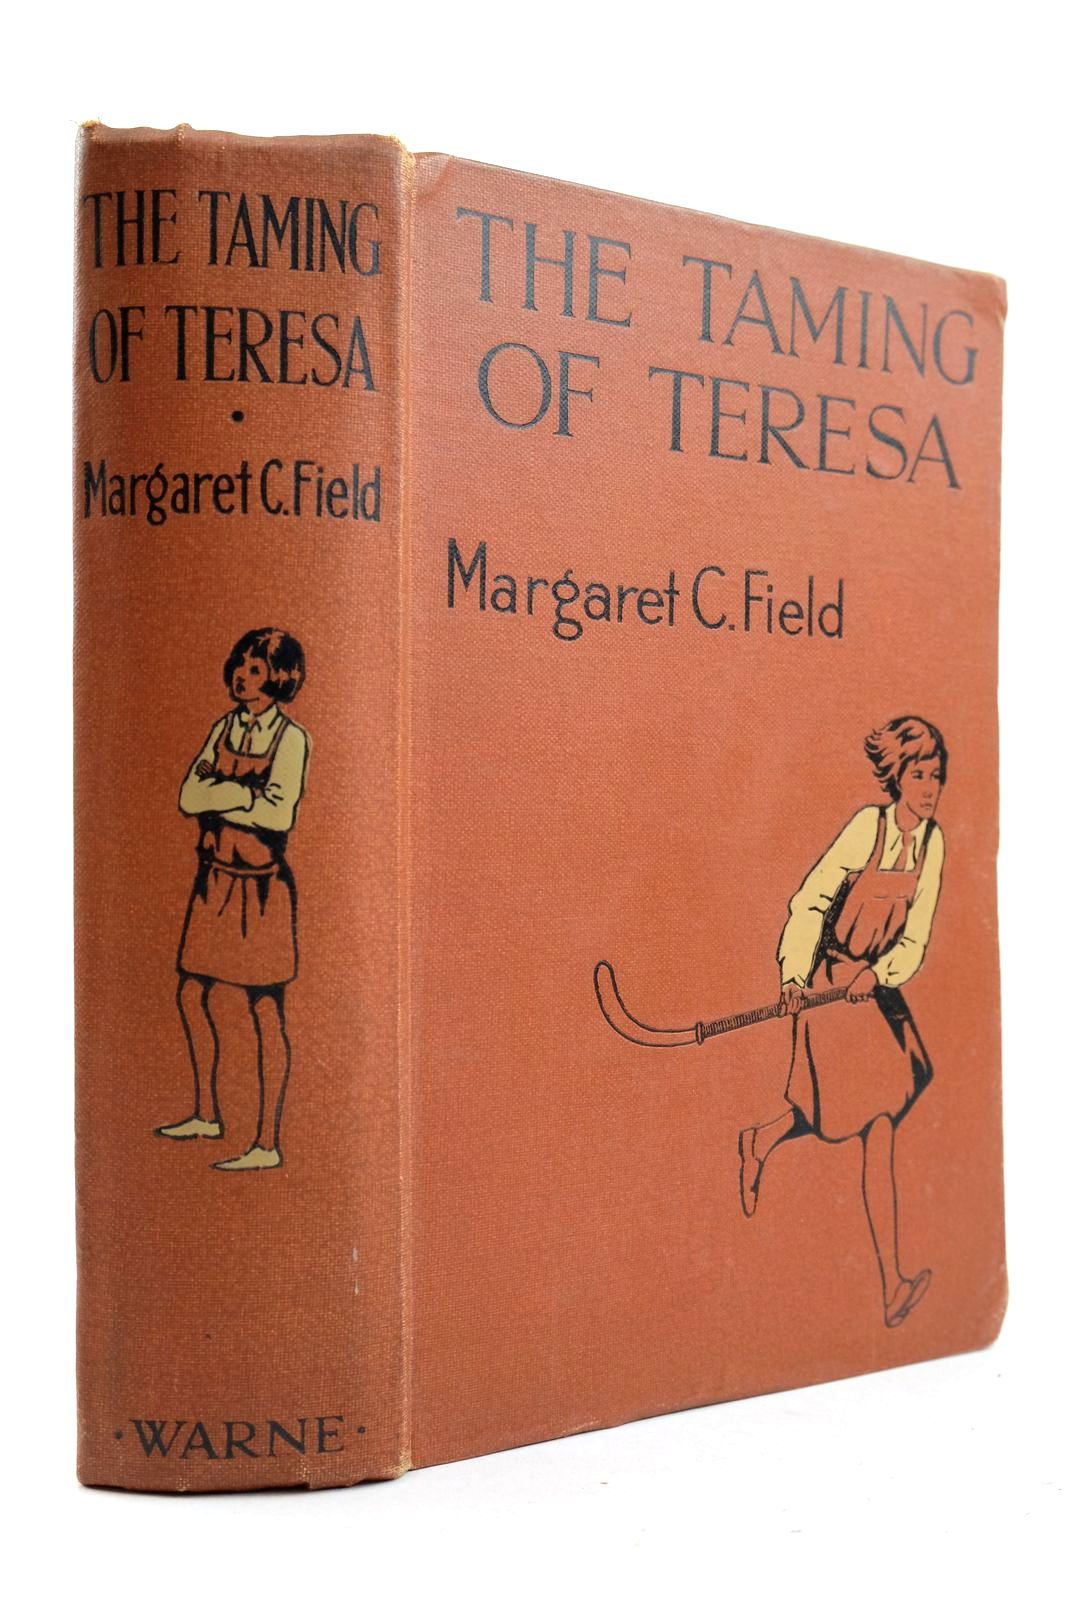 Photo of THE TAMING OF TERESA- Stock Number: 2133075